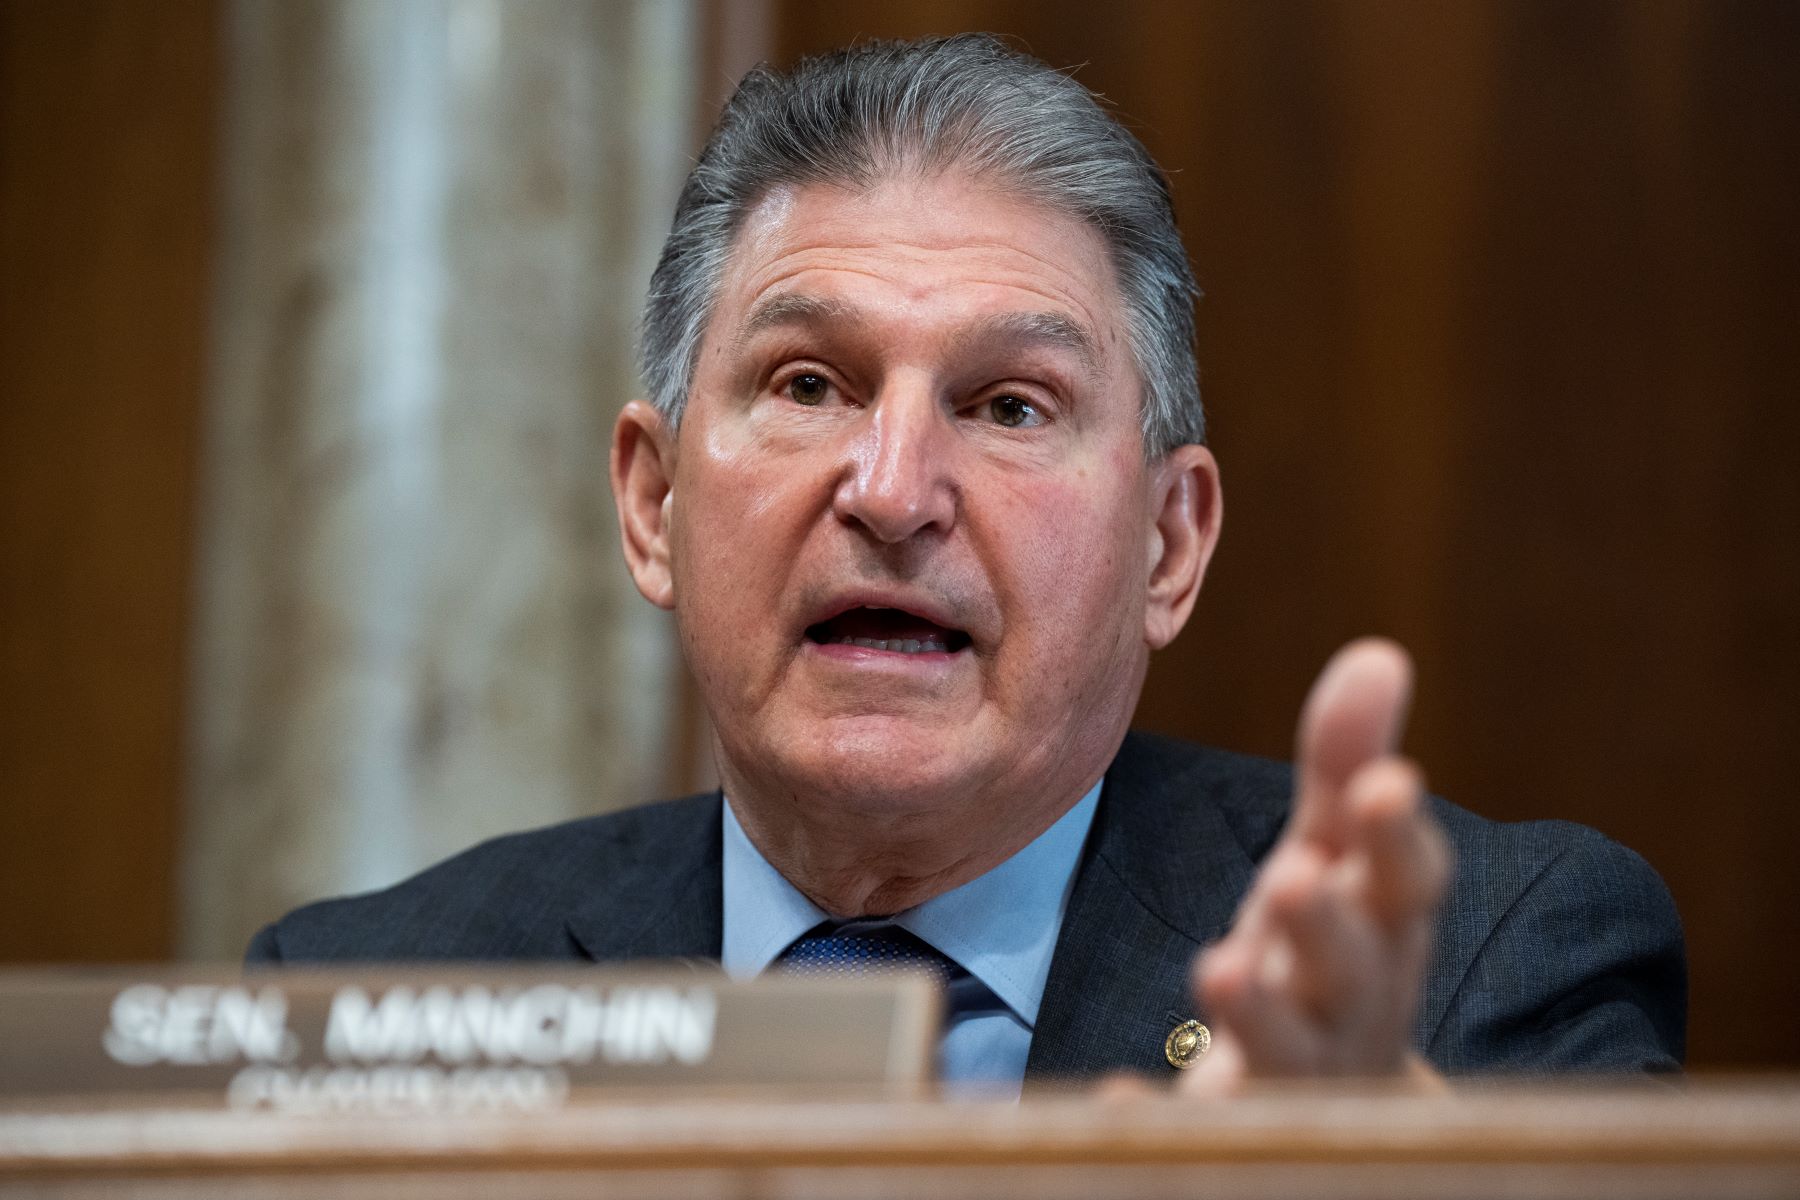 Senator Joe Manchin as Chairmen of the Senate Energy and Natural Resources Committee discussing a hydrogen plant